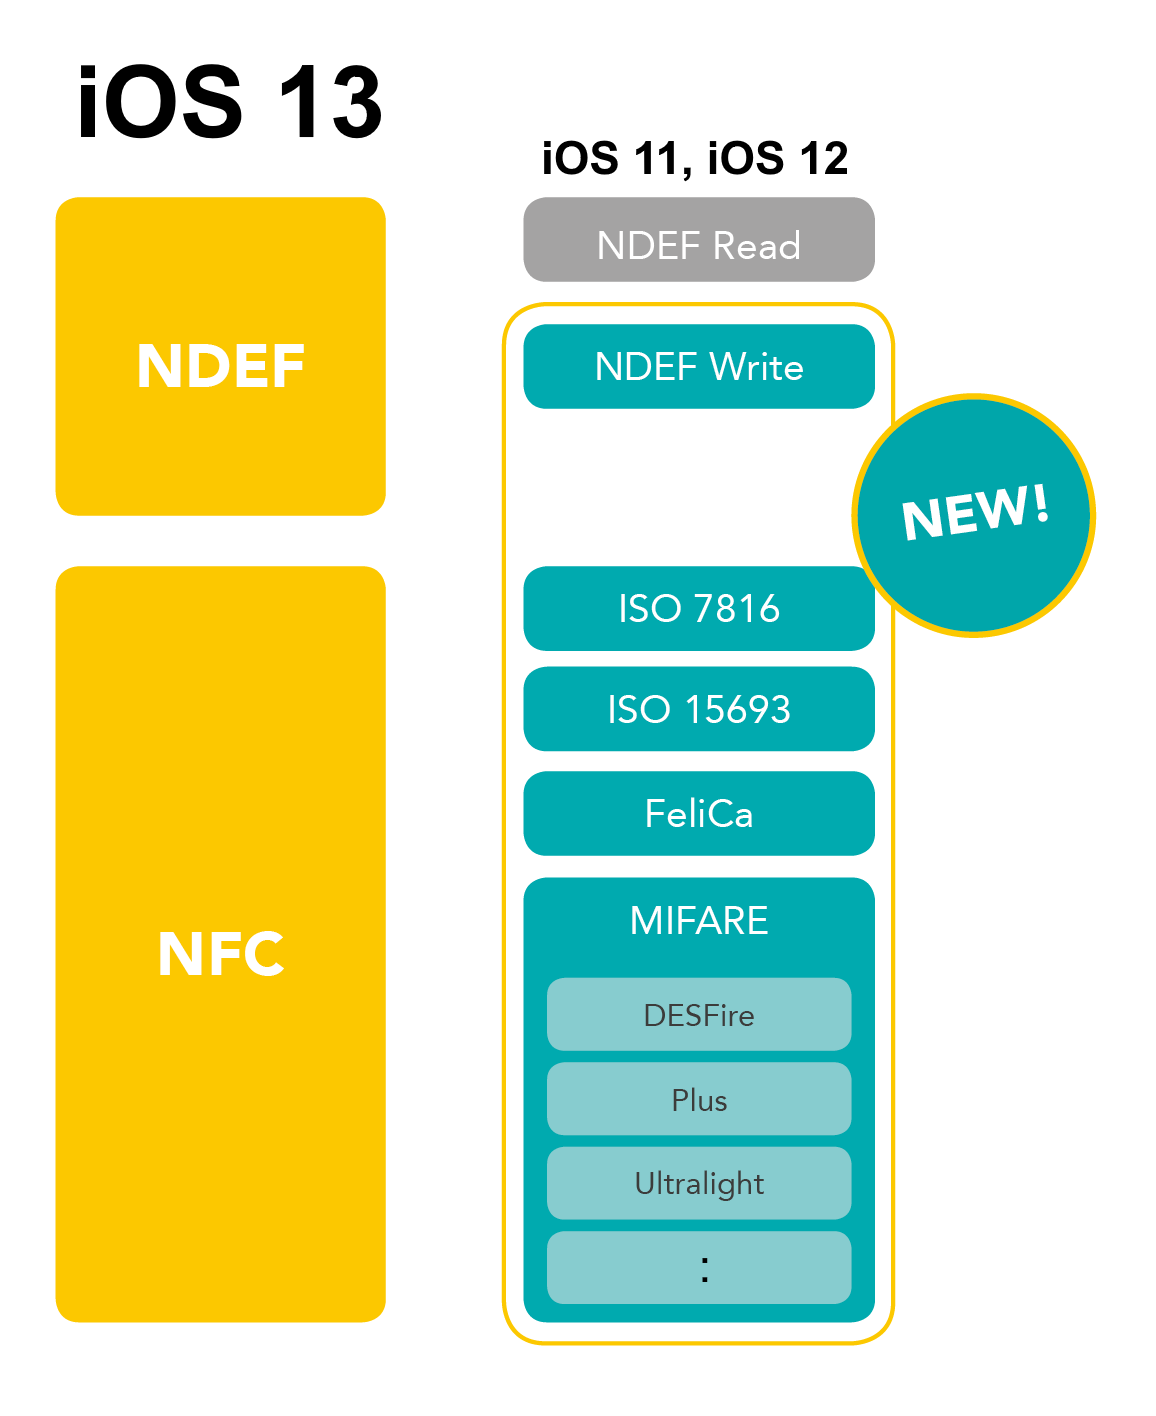 iOS 13 enables new NFC and MIFARE possibilities 